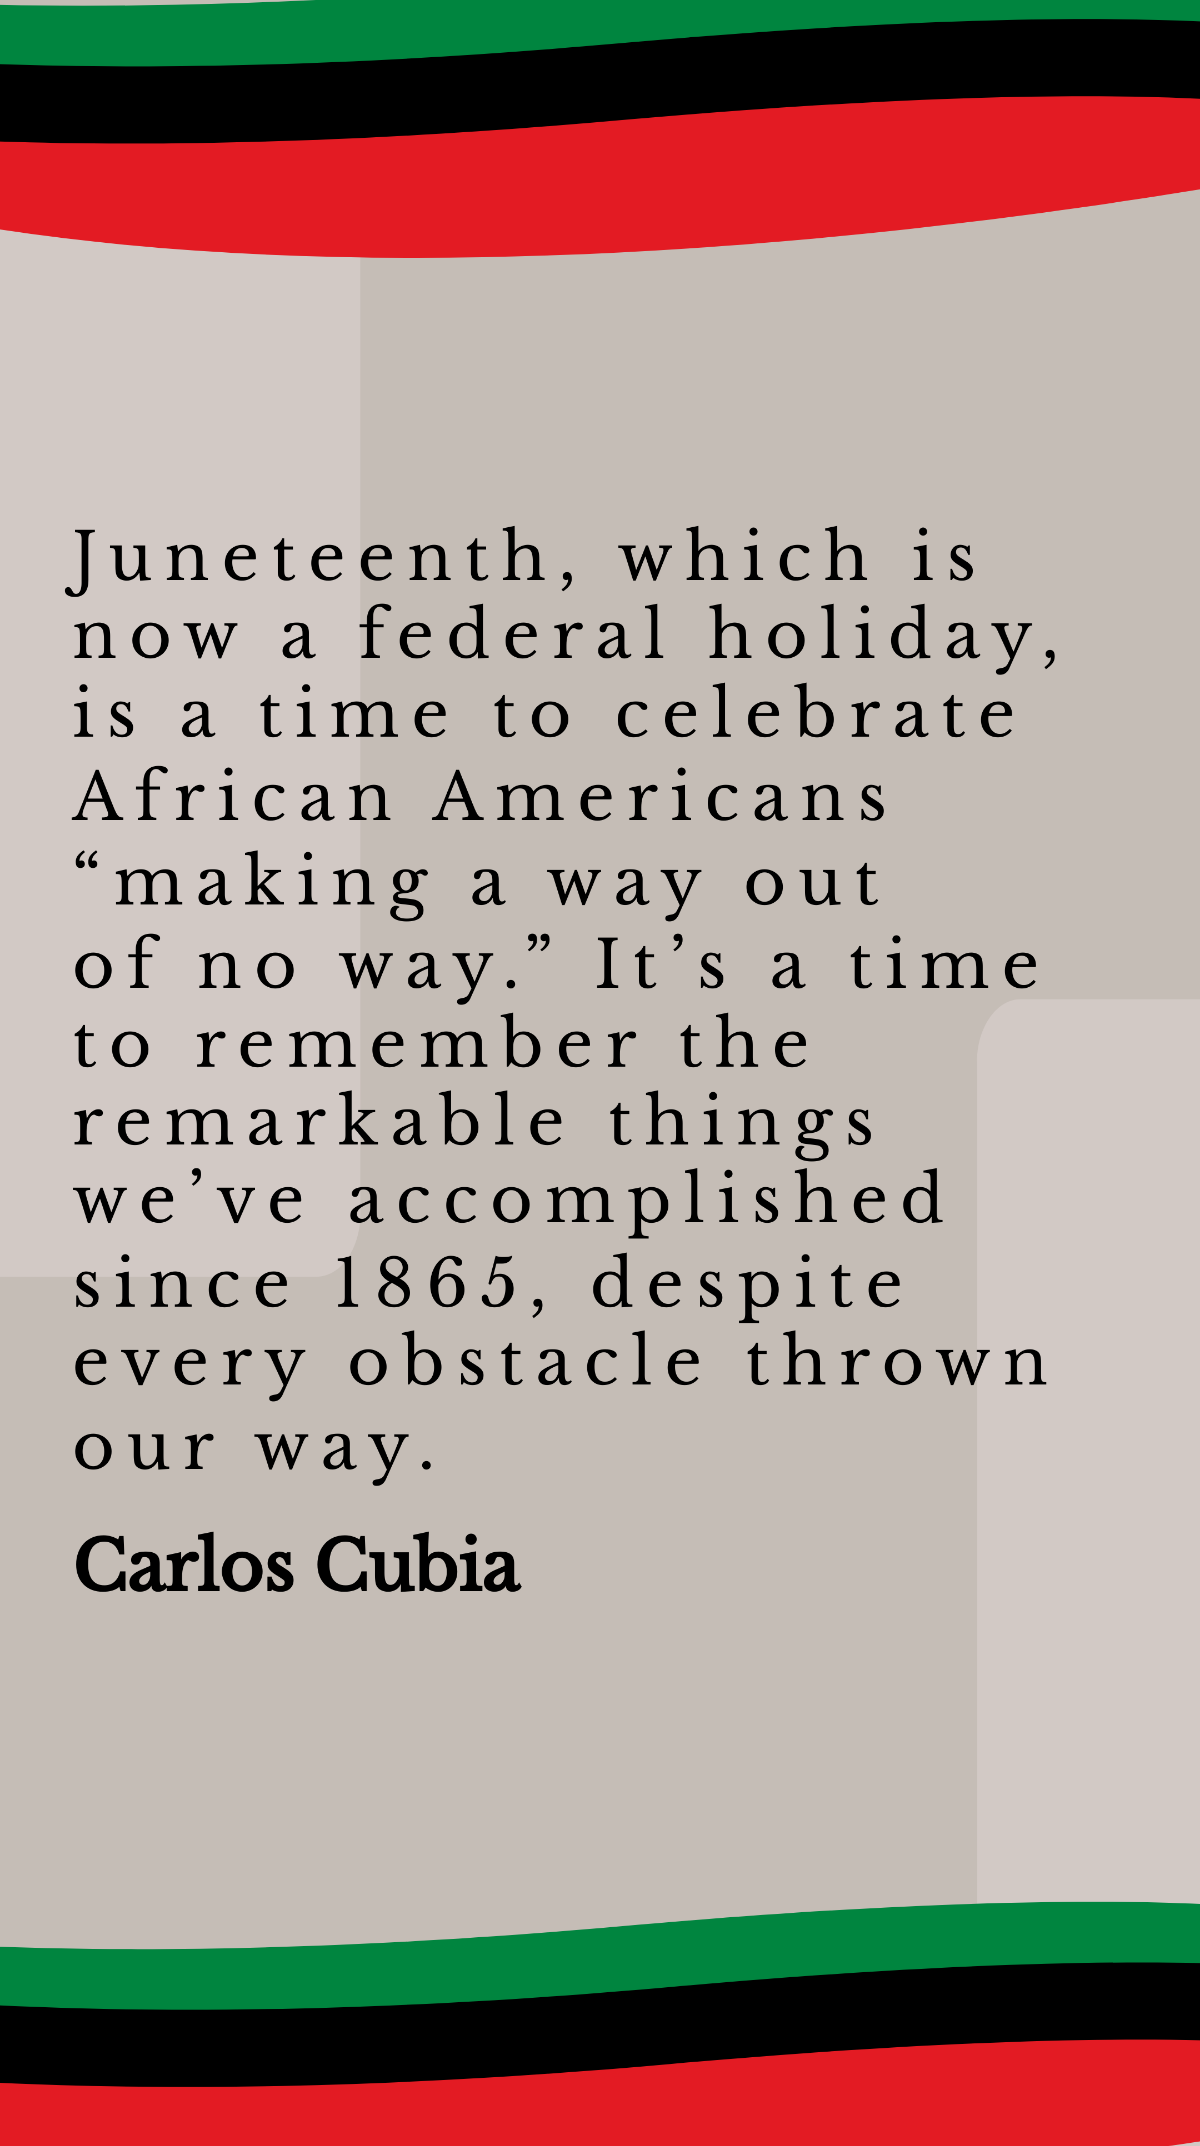 Carlos Cubia - Juneteenth, which is now a federal holiday, is a time to celebrate African Americans “making a way out of no way.” It’s a time to remember the remarkable things we’ve accomplished since